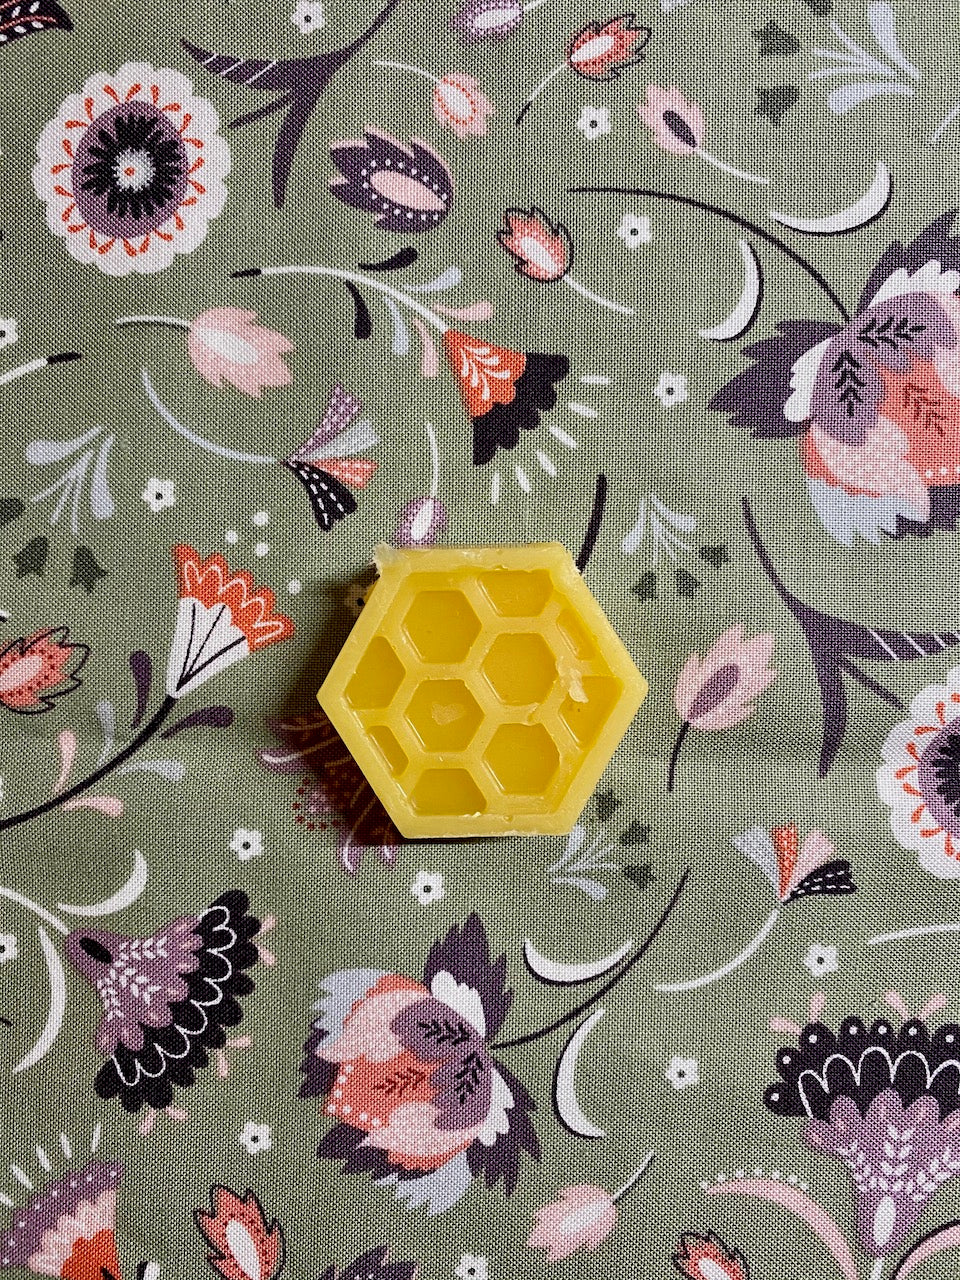 Make Your Own Beeswax Wraps Kits